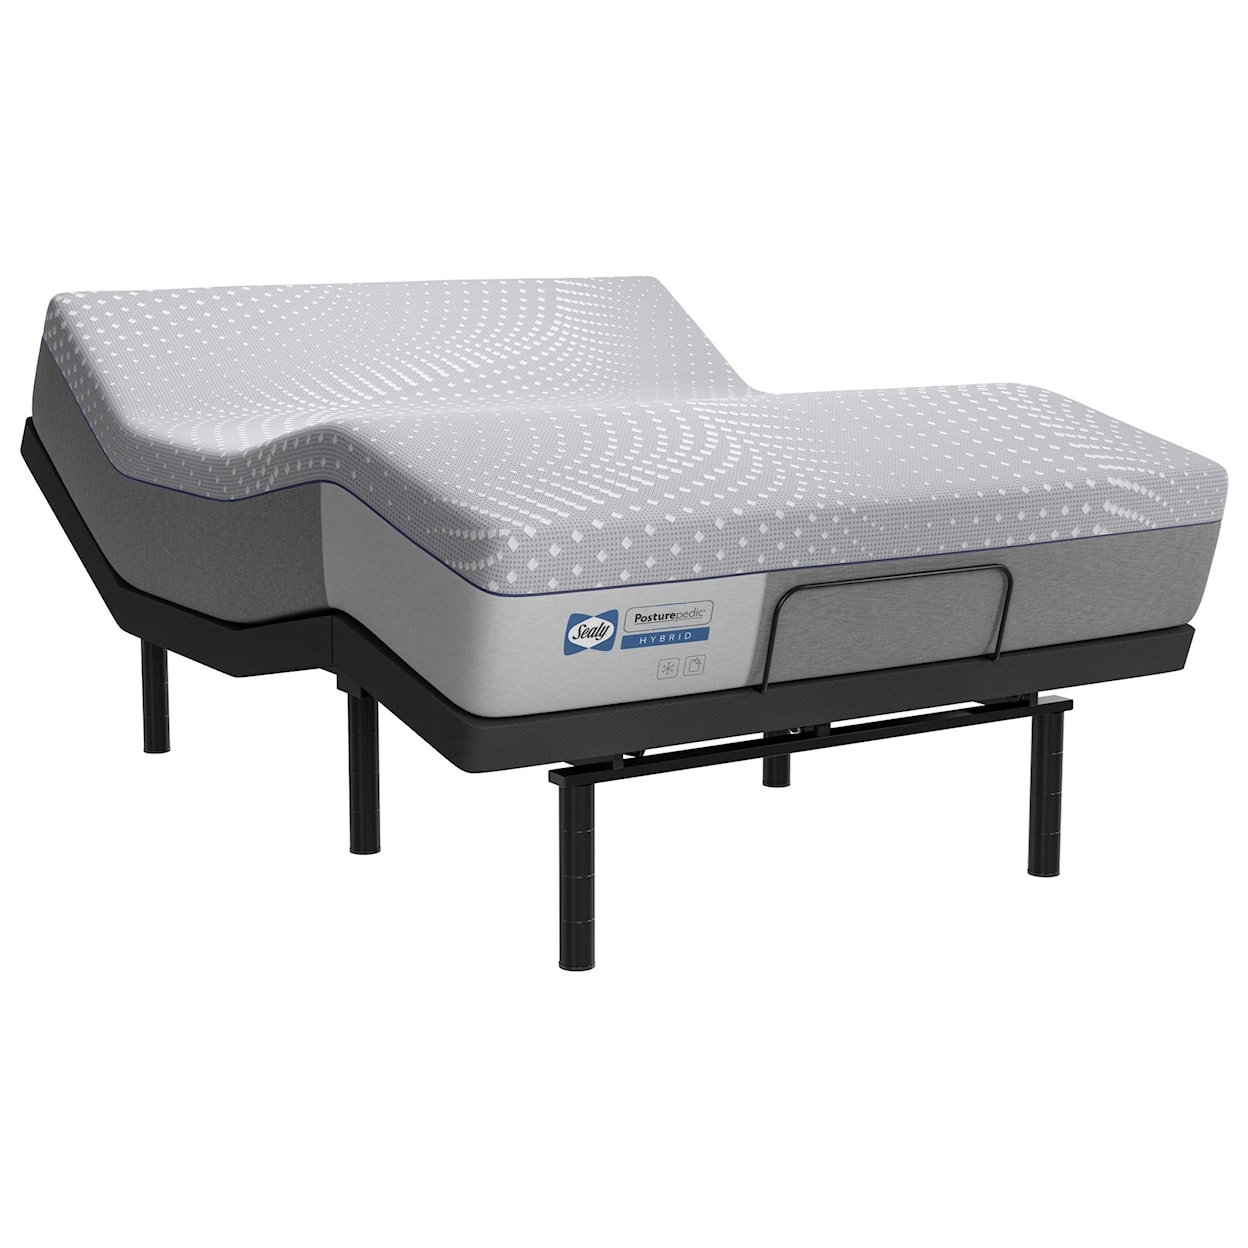 Sealy PPH5 Posturpedic Hybrid Firm Queen 13" Firm Hybrid Adjustable Set